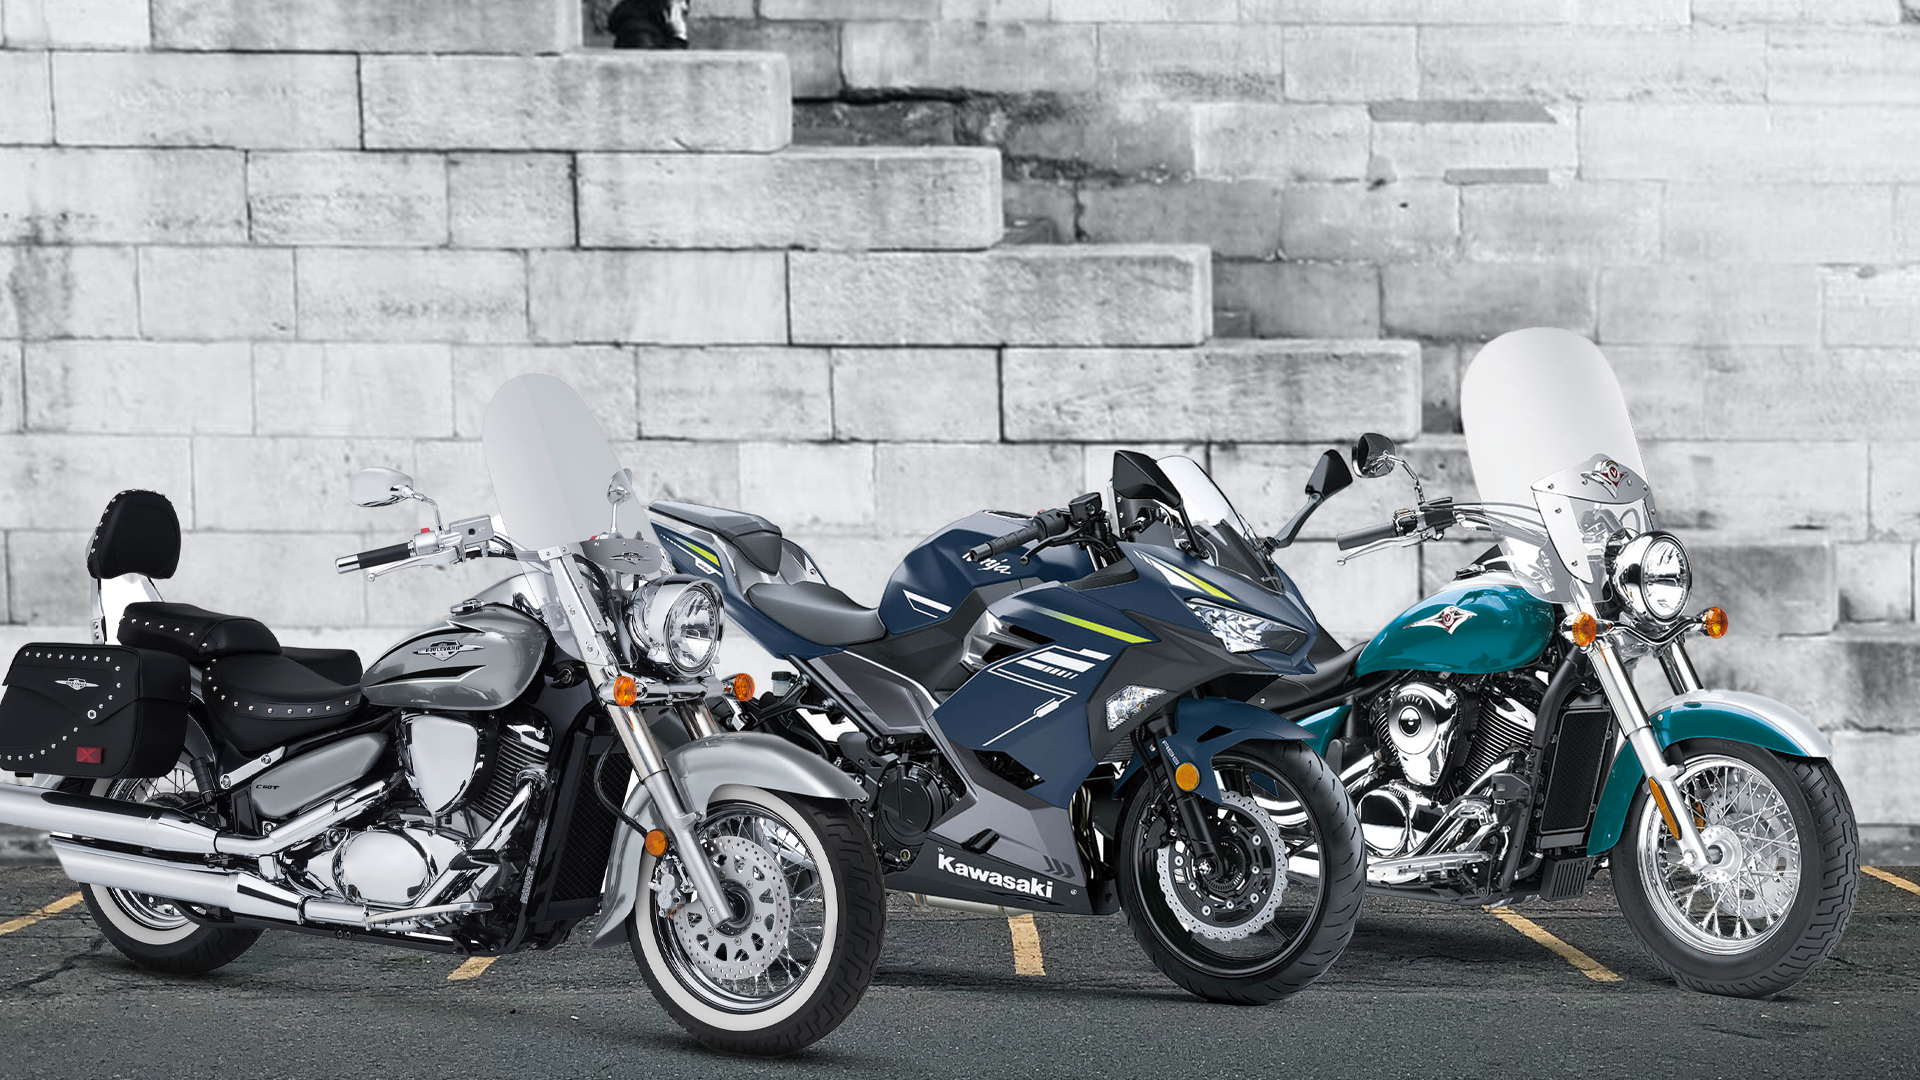 The Best Touring Motorcycles for New Riders